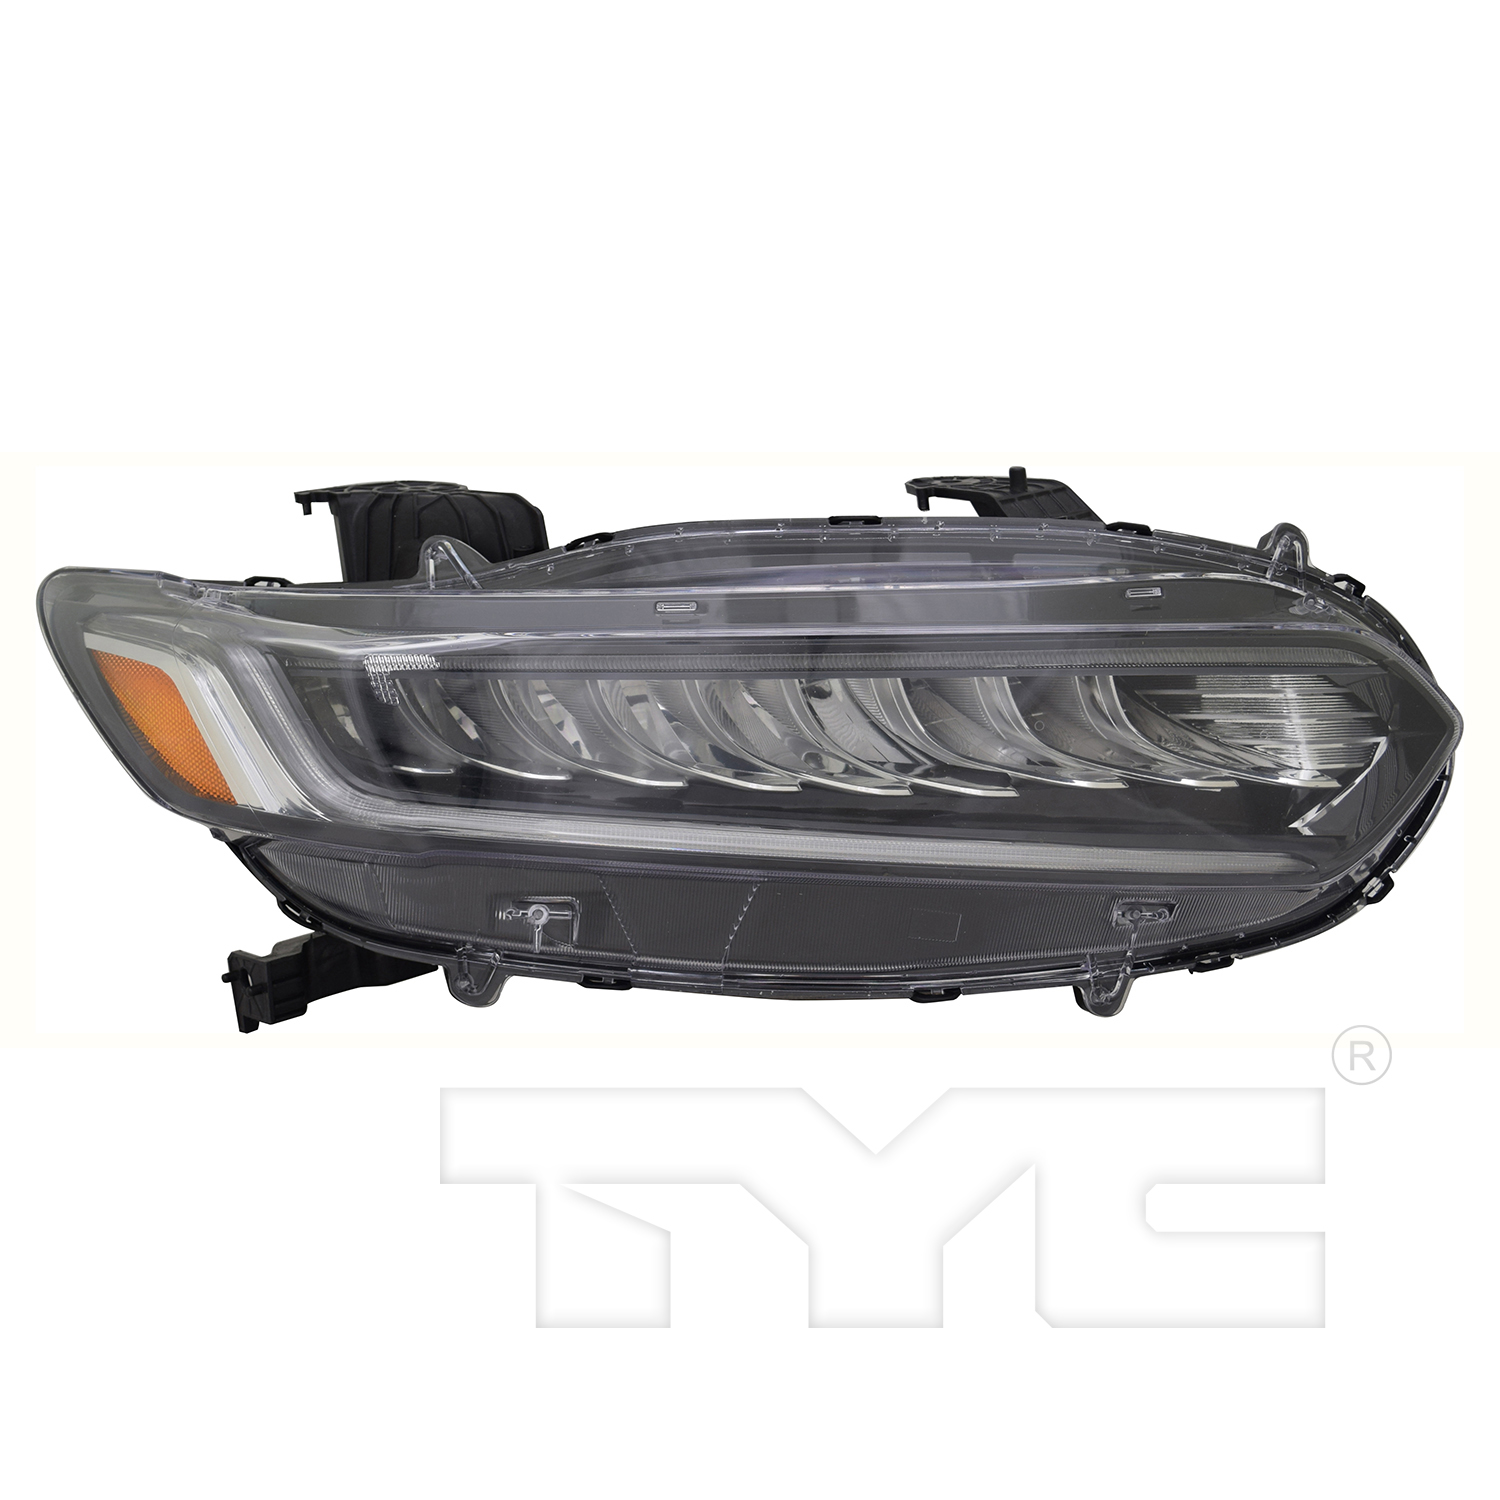 Aftermarket HEADLIGHTS for HONDA - ACCORD, ACCORD,18-20,RT Headlamp assy composite